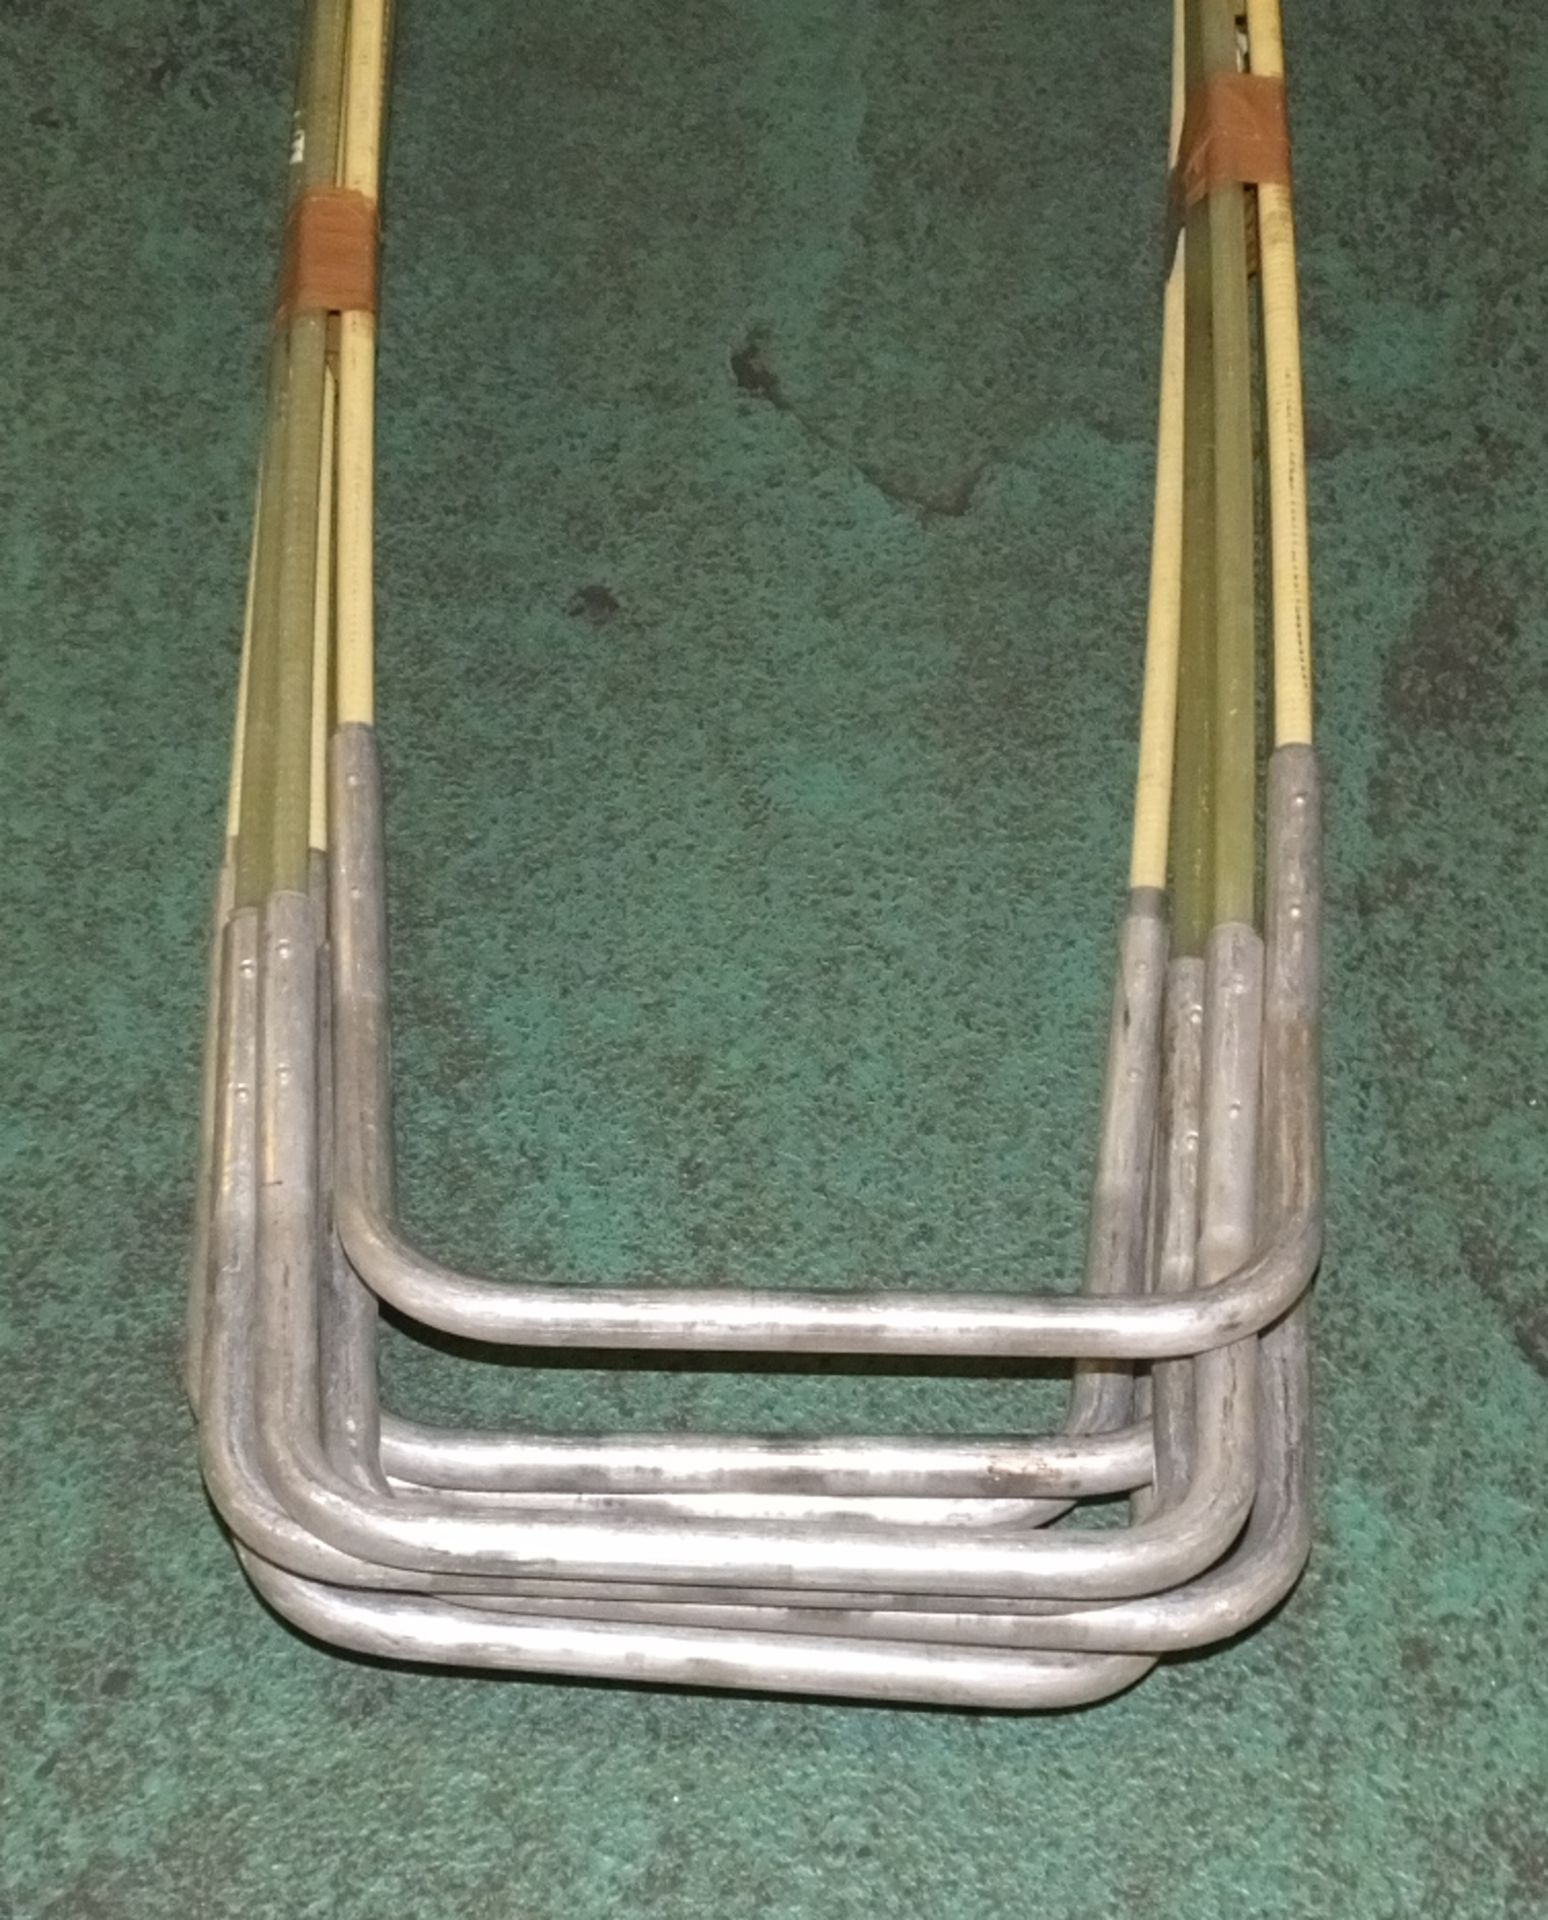 7x pull sled harnesses - Image 3 of 3